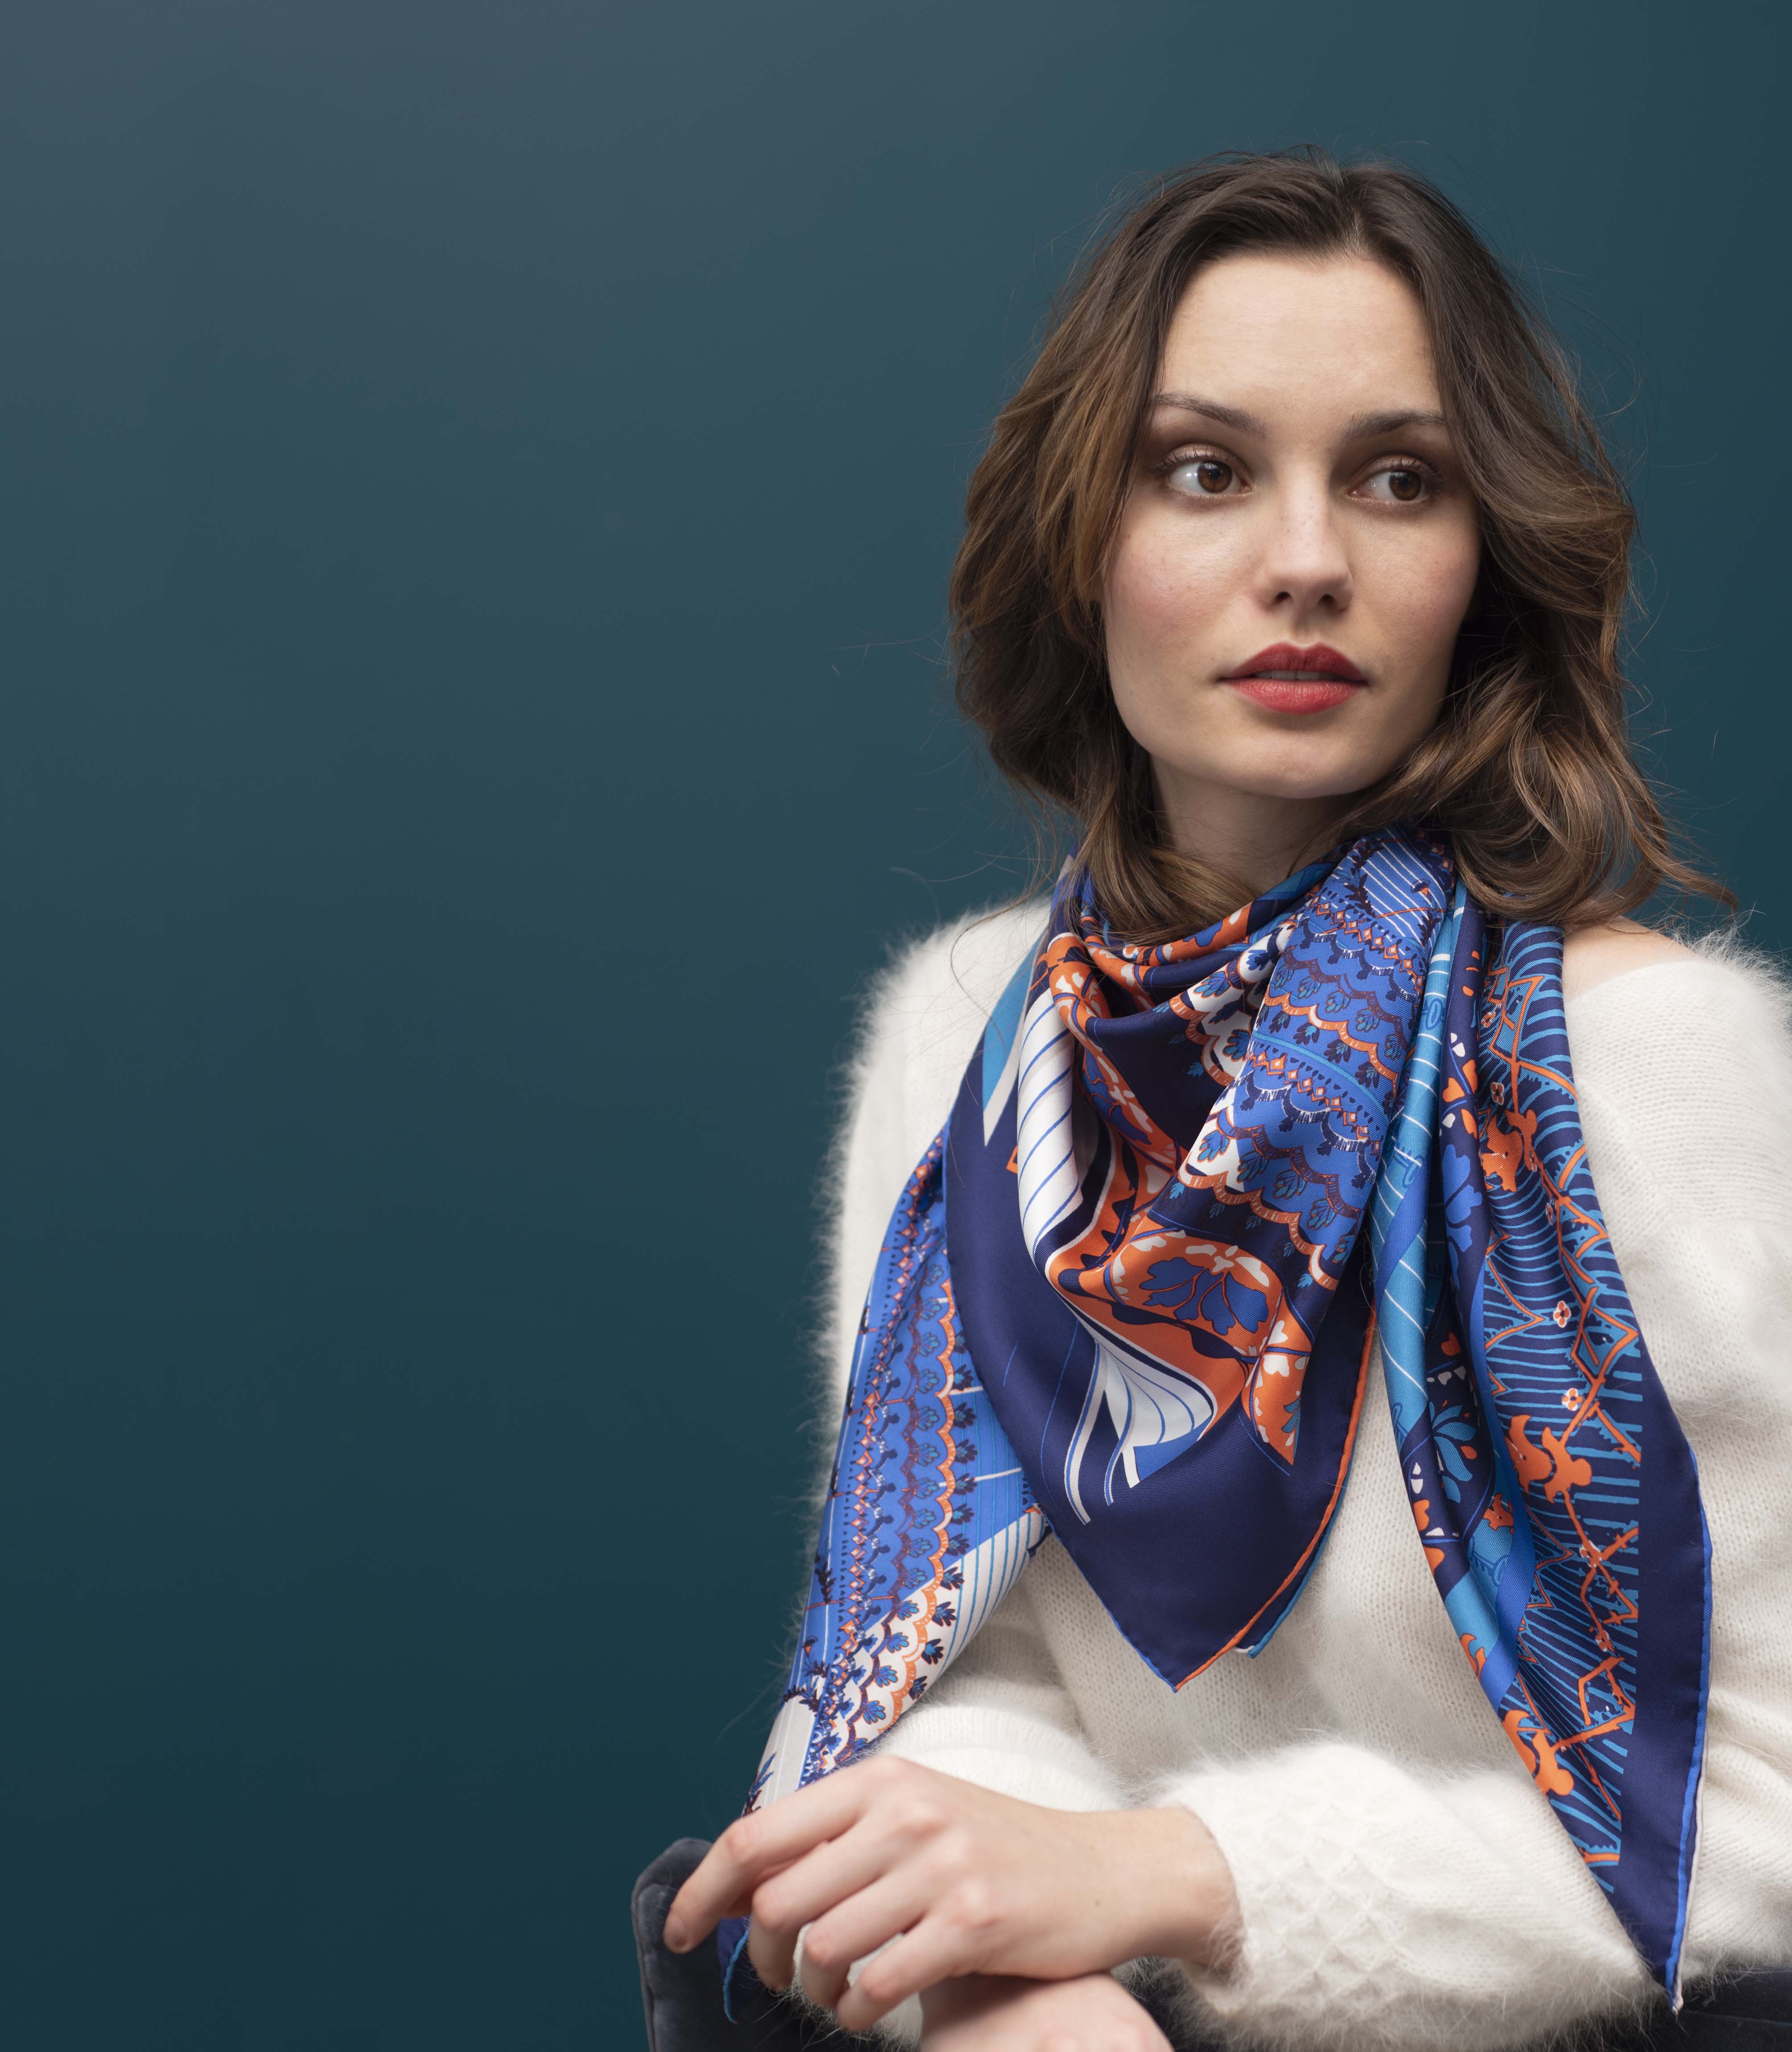 Woman with silk scarf leaning